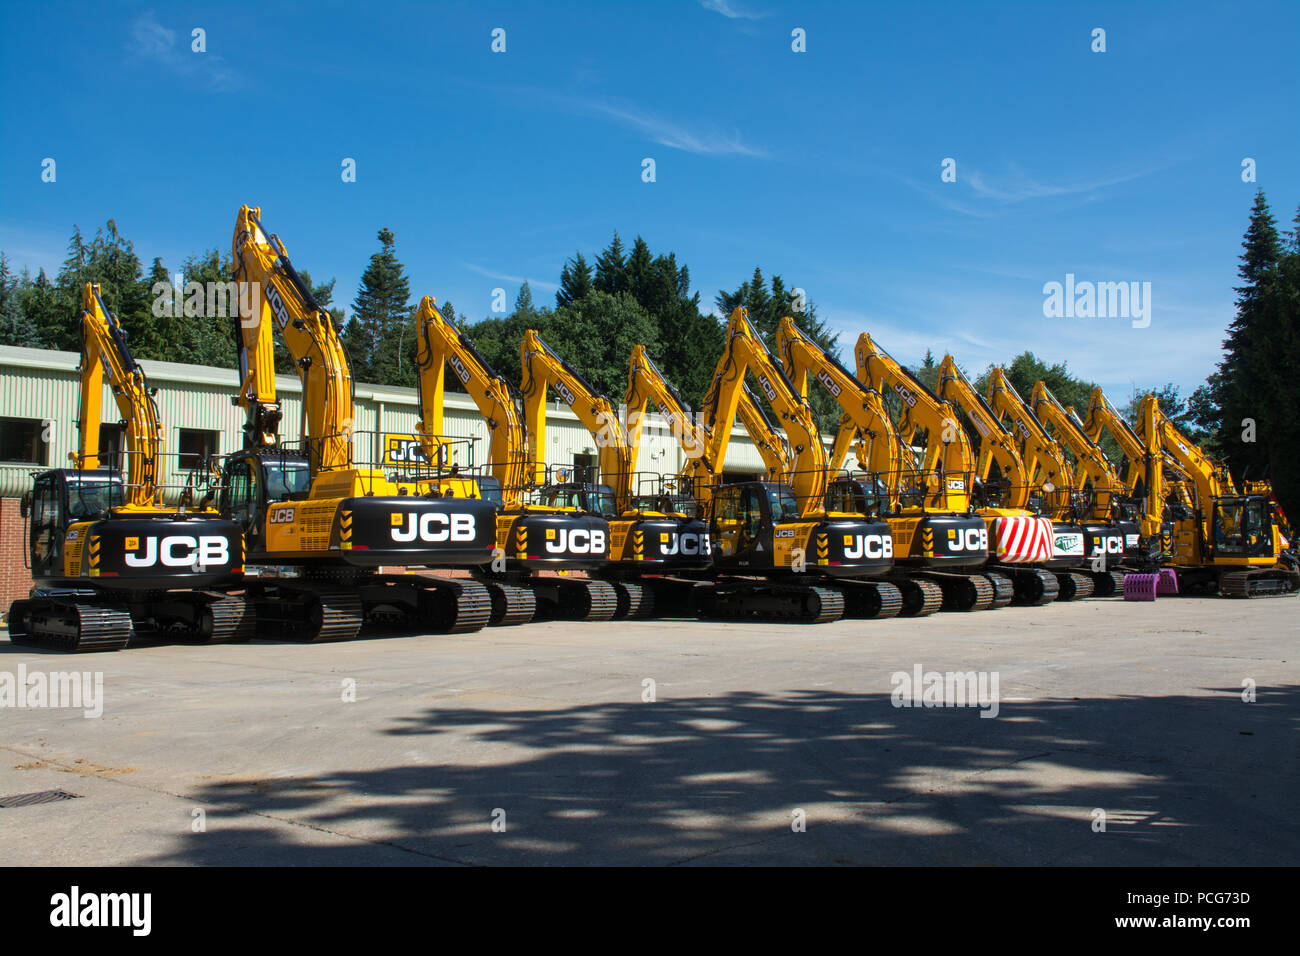 Greenshields JCB depot, dealer and distributer of JCB construction and industrial equipment based near Farnham, Surrey, UK. Row of yellow JCB diggers. Stock Photo